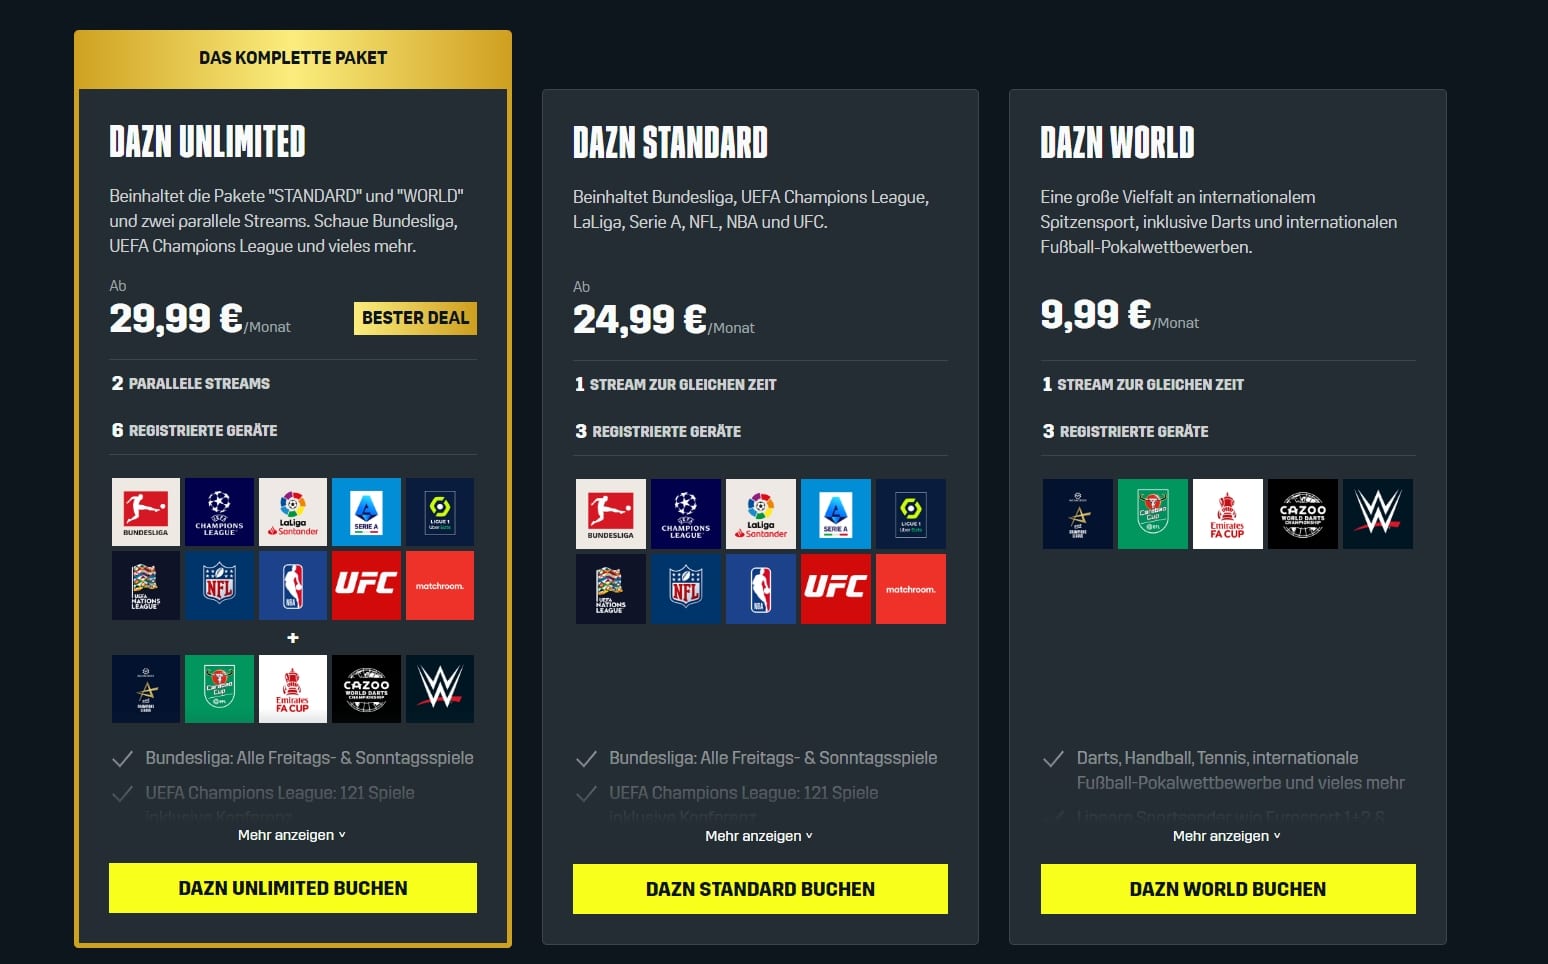 costs euros Sports streaming now 40 price up month increase: to DAZN per